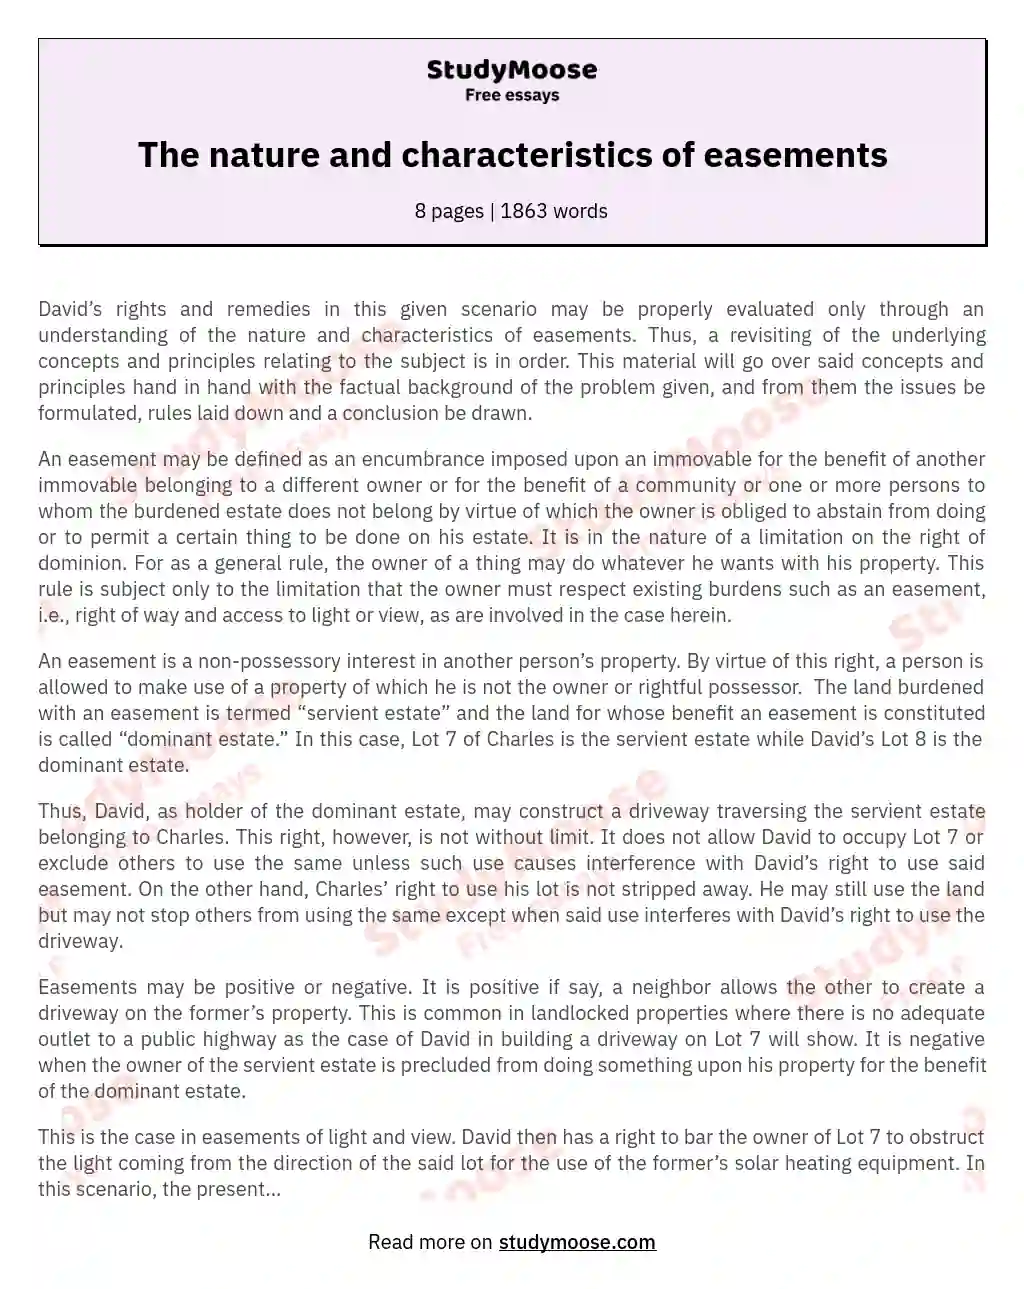 The nature and characteristics of easements essay